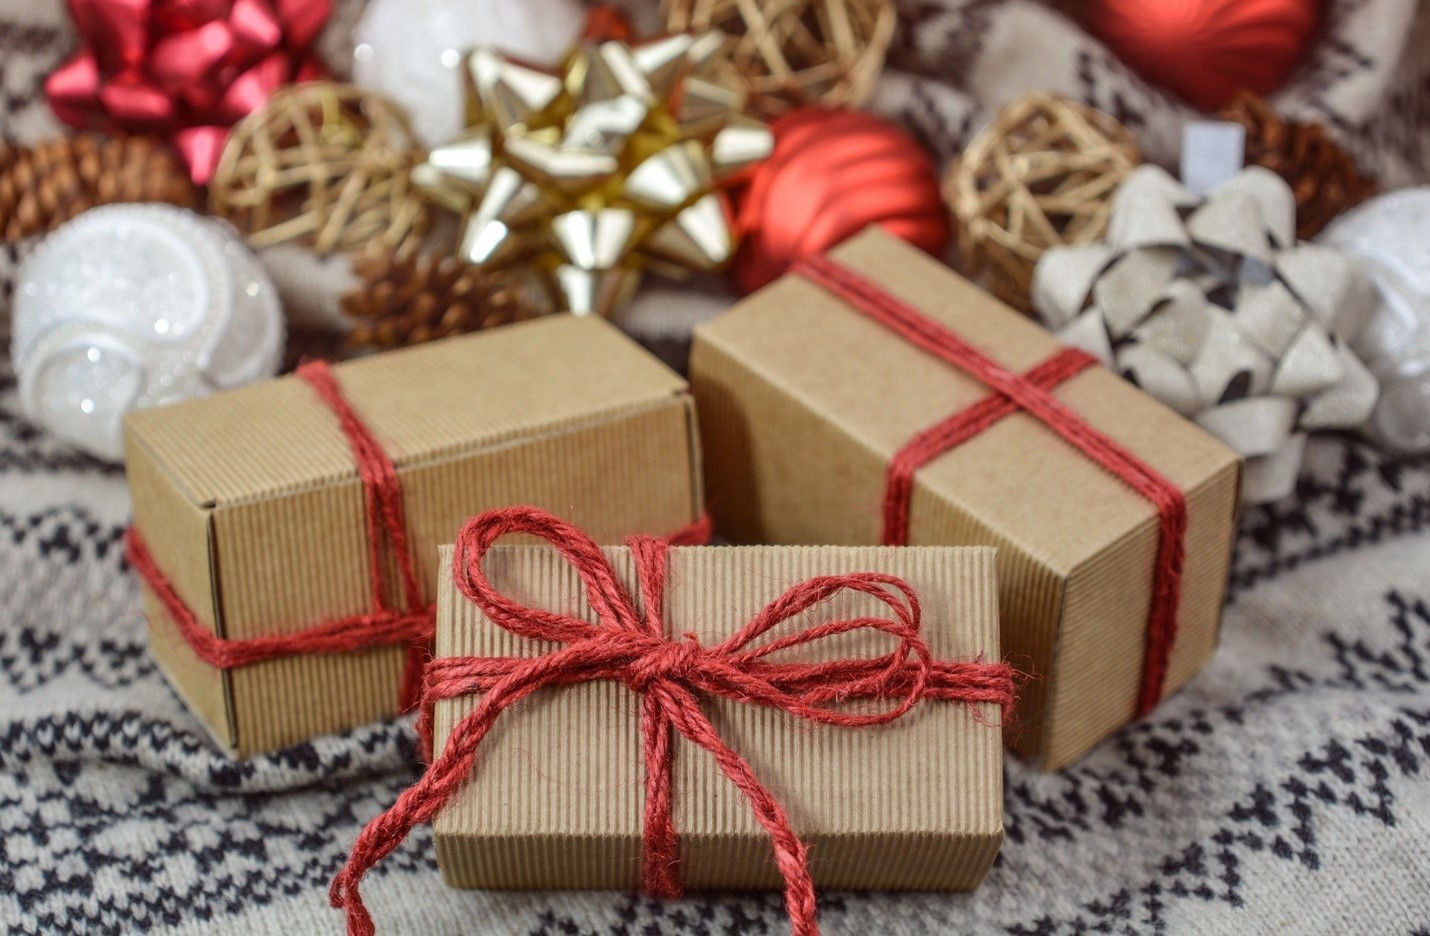 Five ways to reduce your business’s waste production this holiday season